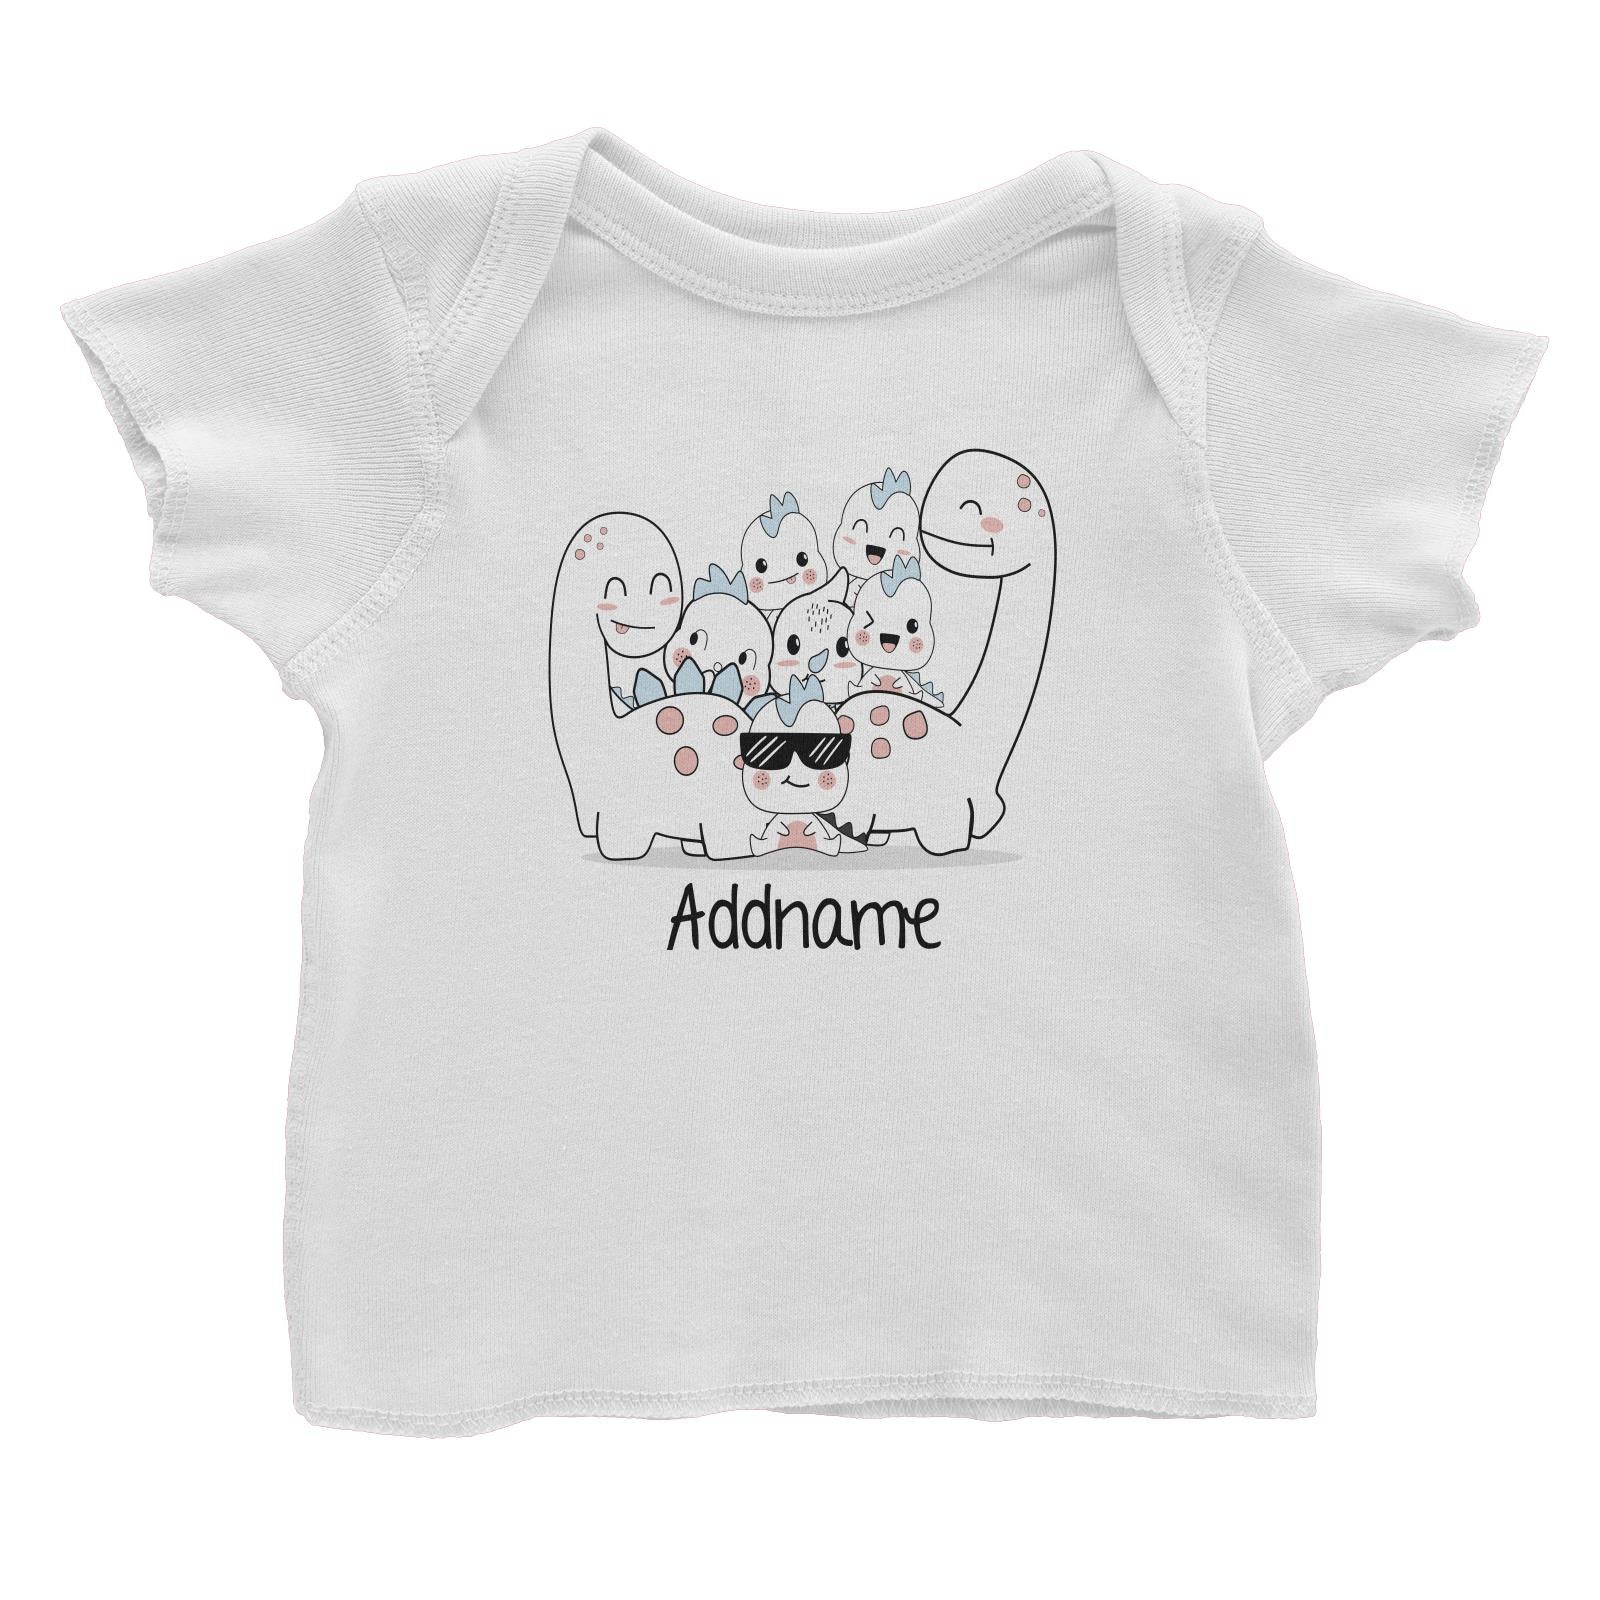 Cute Animals And Friends Series Cute Little Dinosaur Smiling Group Addname Baby T-Shirt